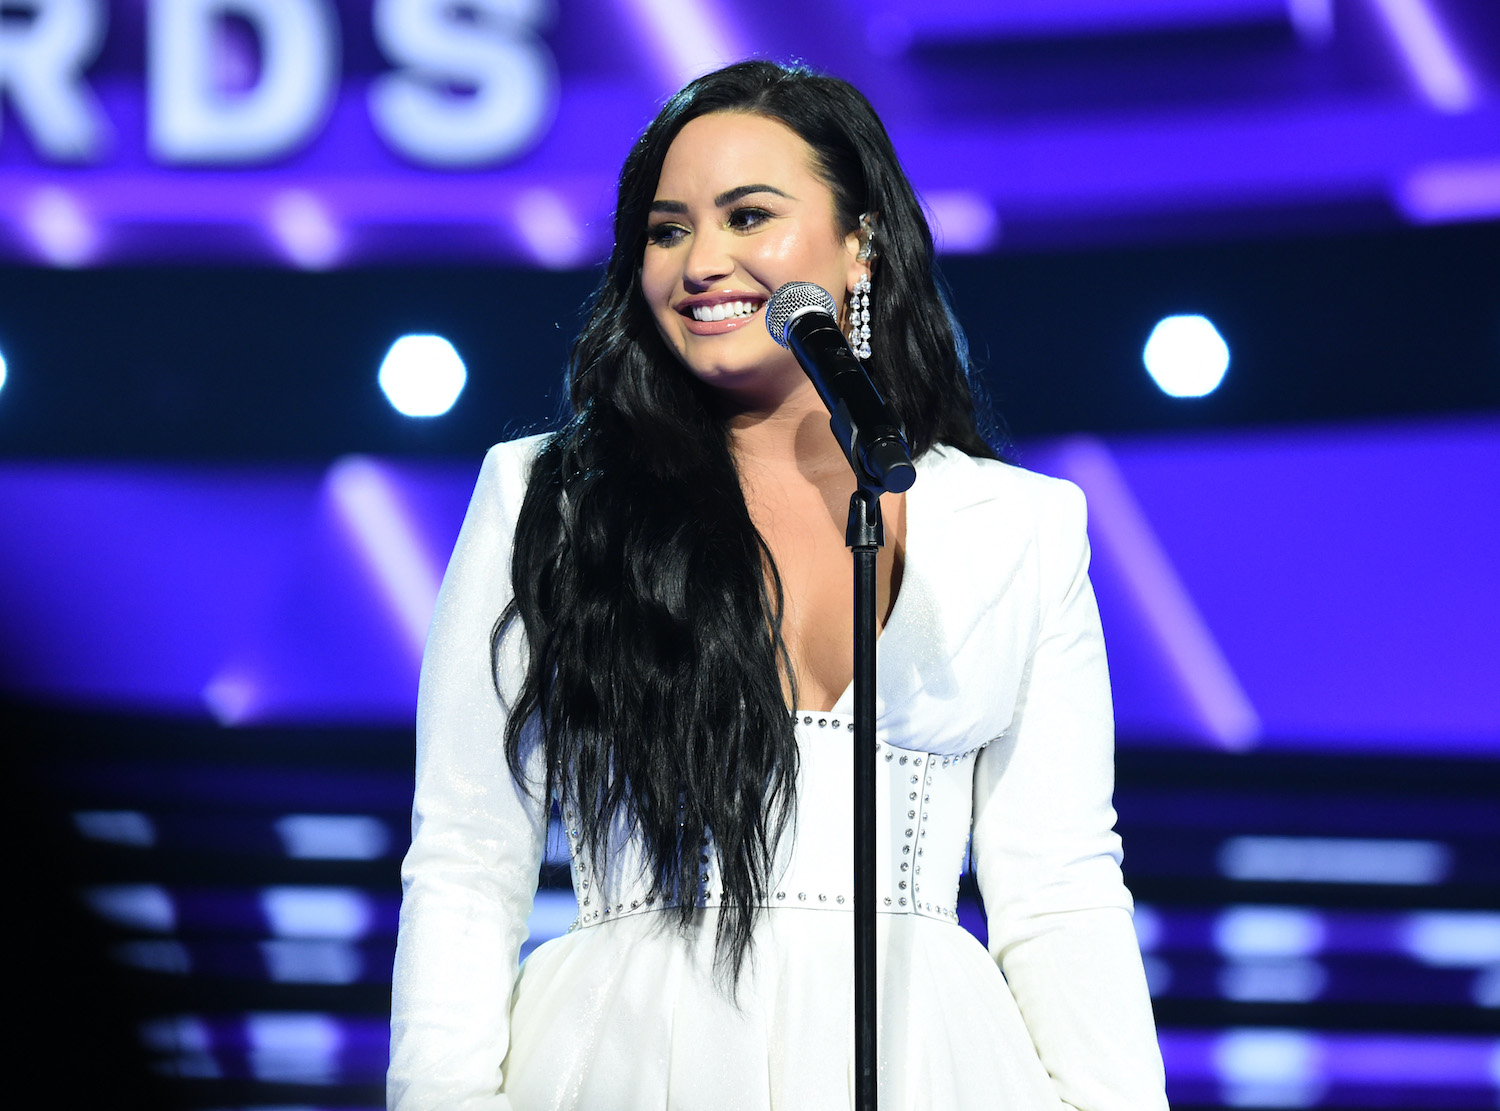 Demi Lovato performs at the 62nd Annual GRAMMY Awards on January 26, 2020